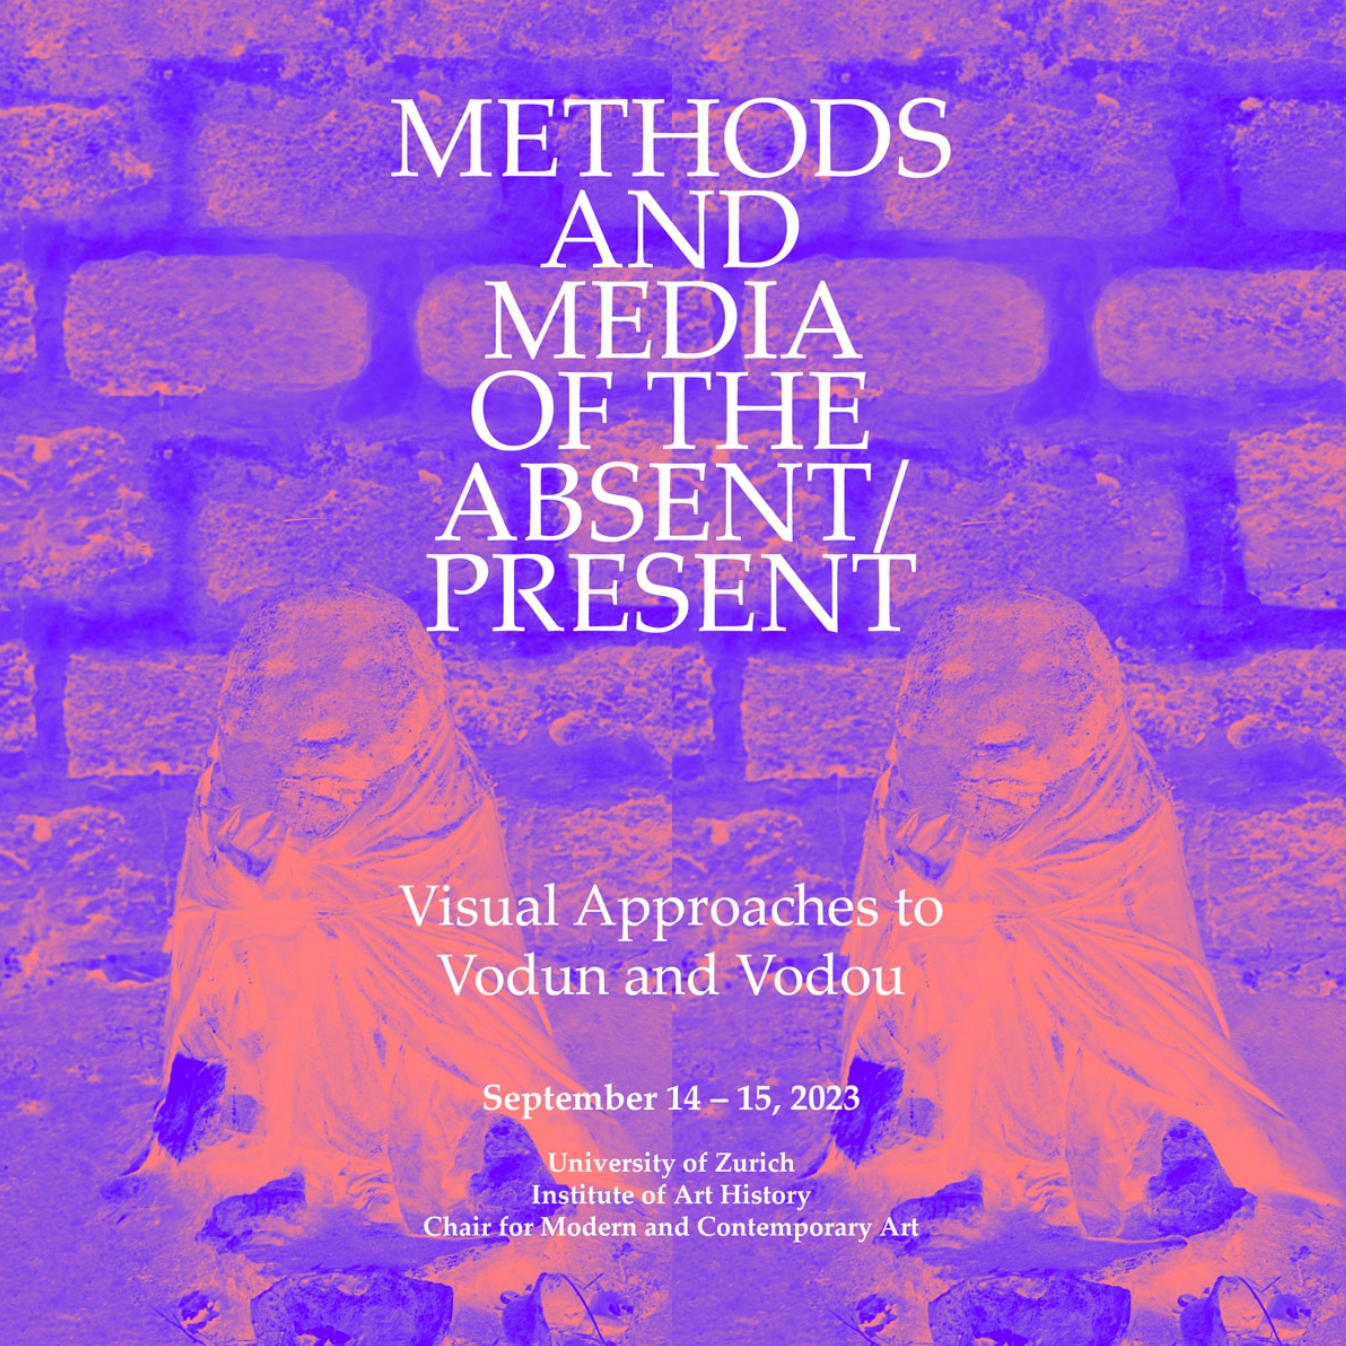 Methods and Media of the Absent/Present. Visual Approaches to Vodun and Vodou